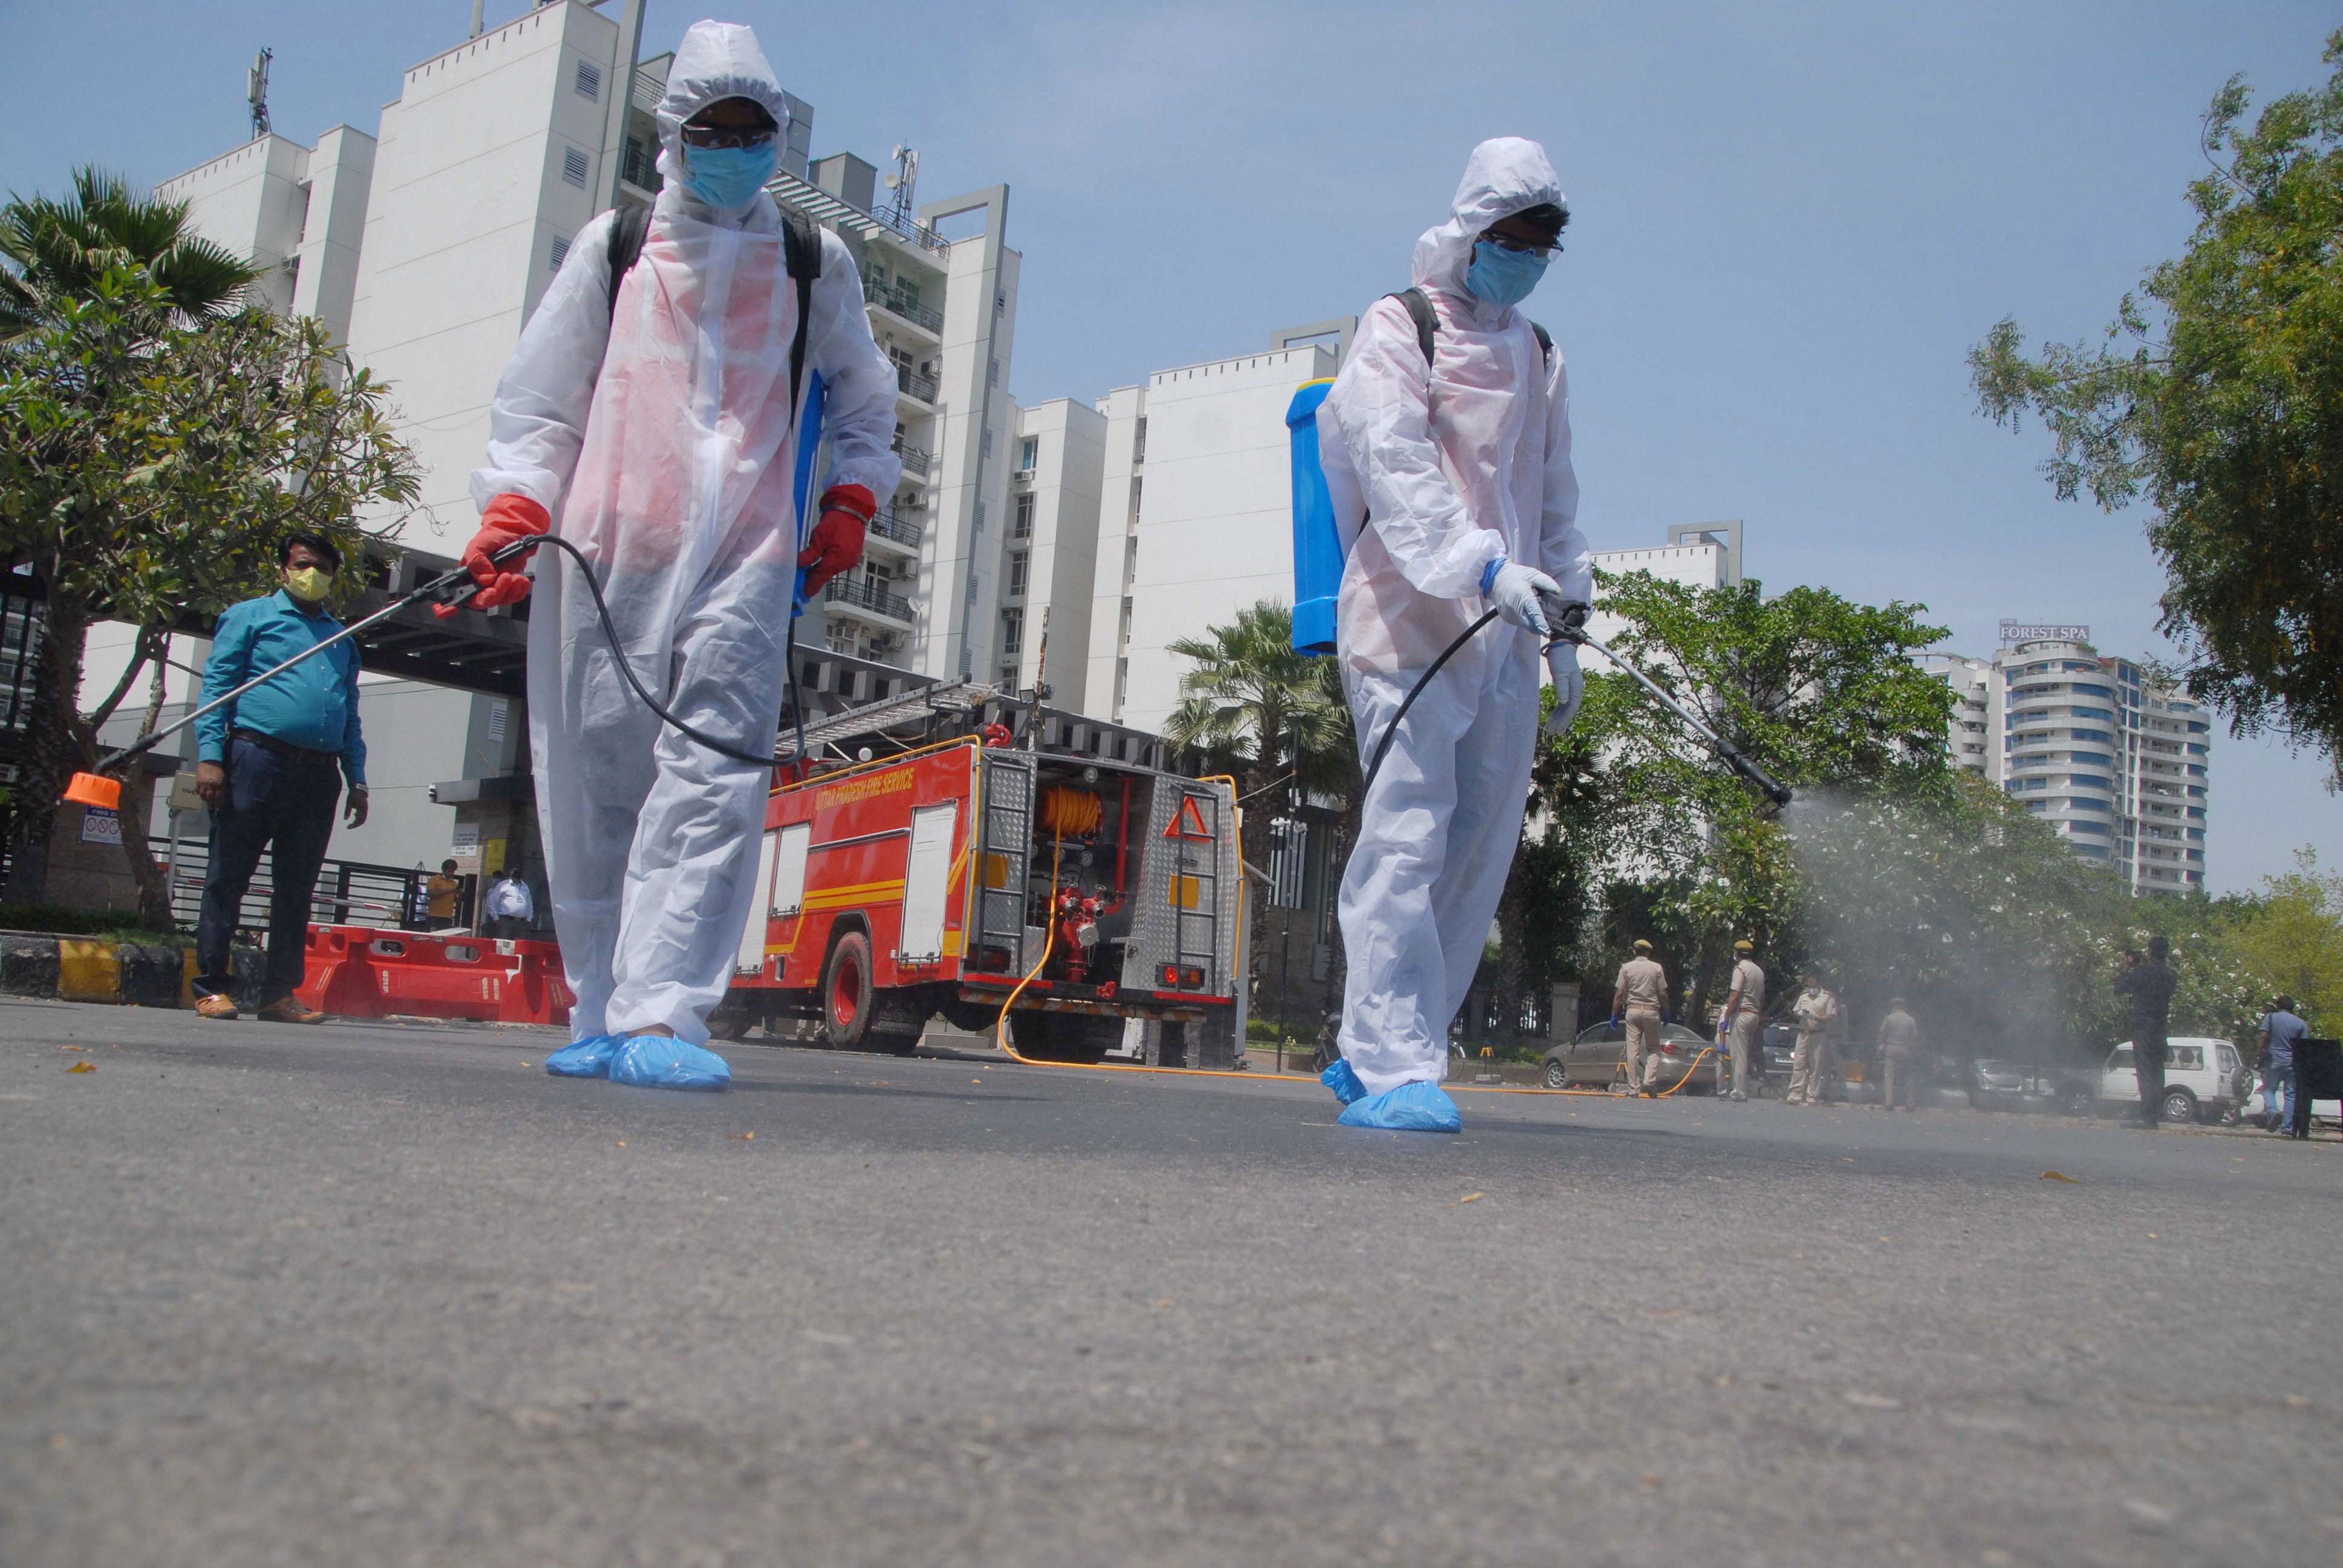 Volunteers wearing protective suits sprays disinfectant outside a housing society, to curb the spread of coronavirus, during the nationwide lockdown, in Noida. (Credit: PTI)